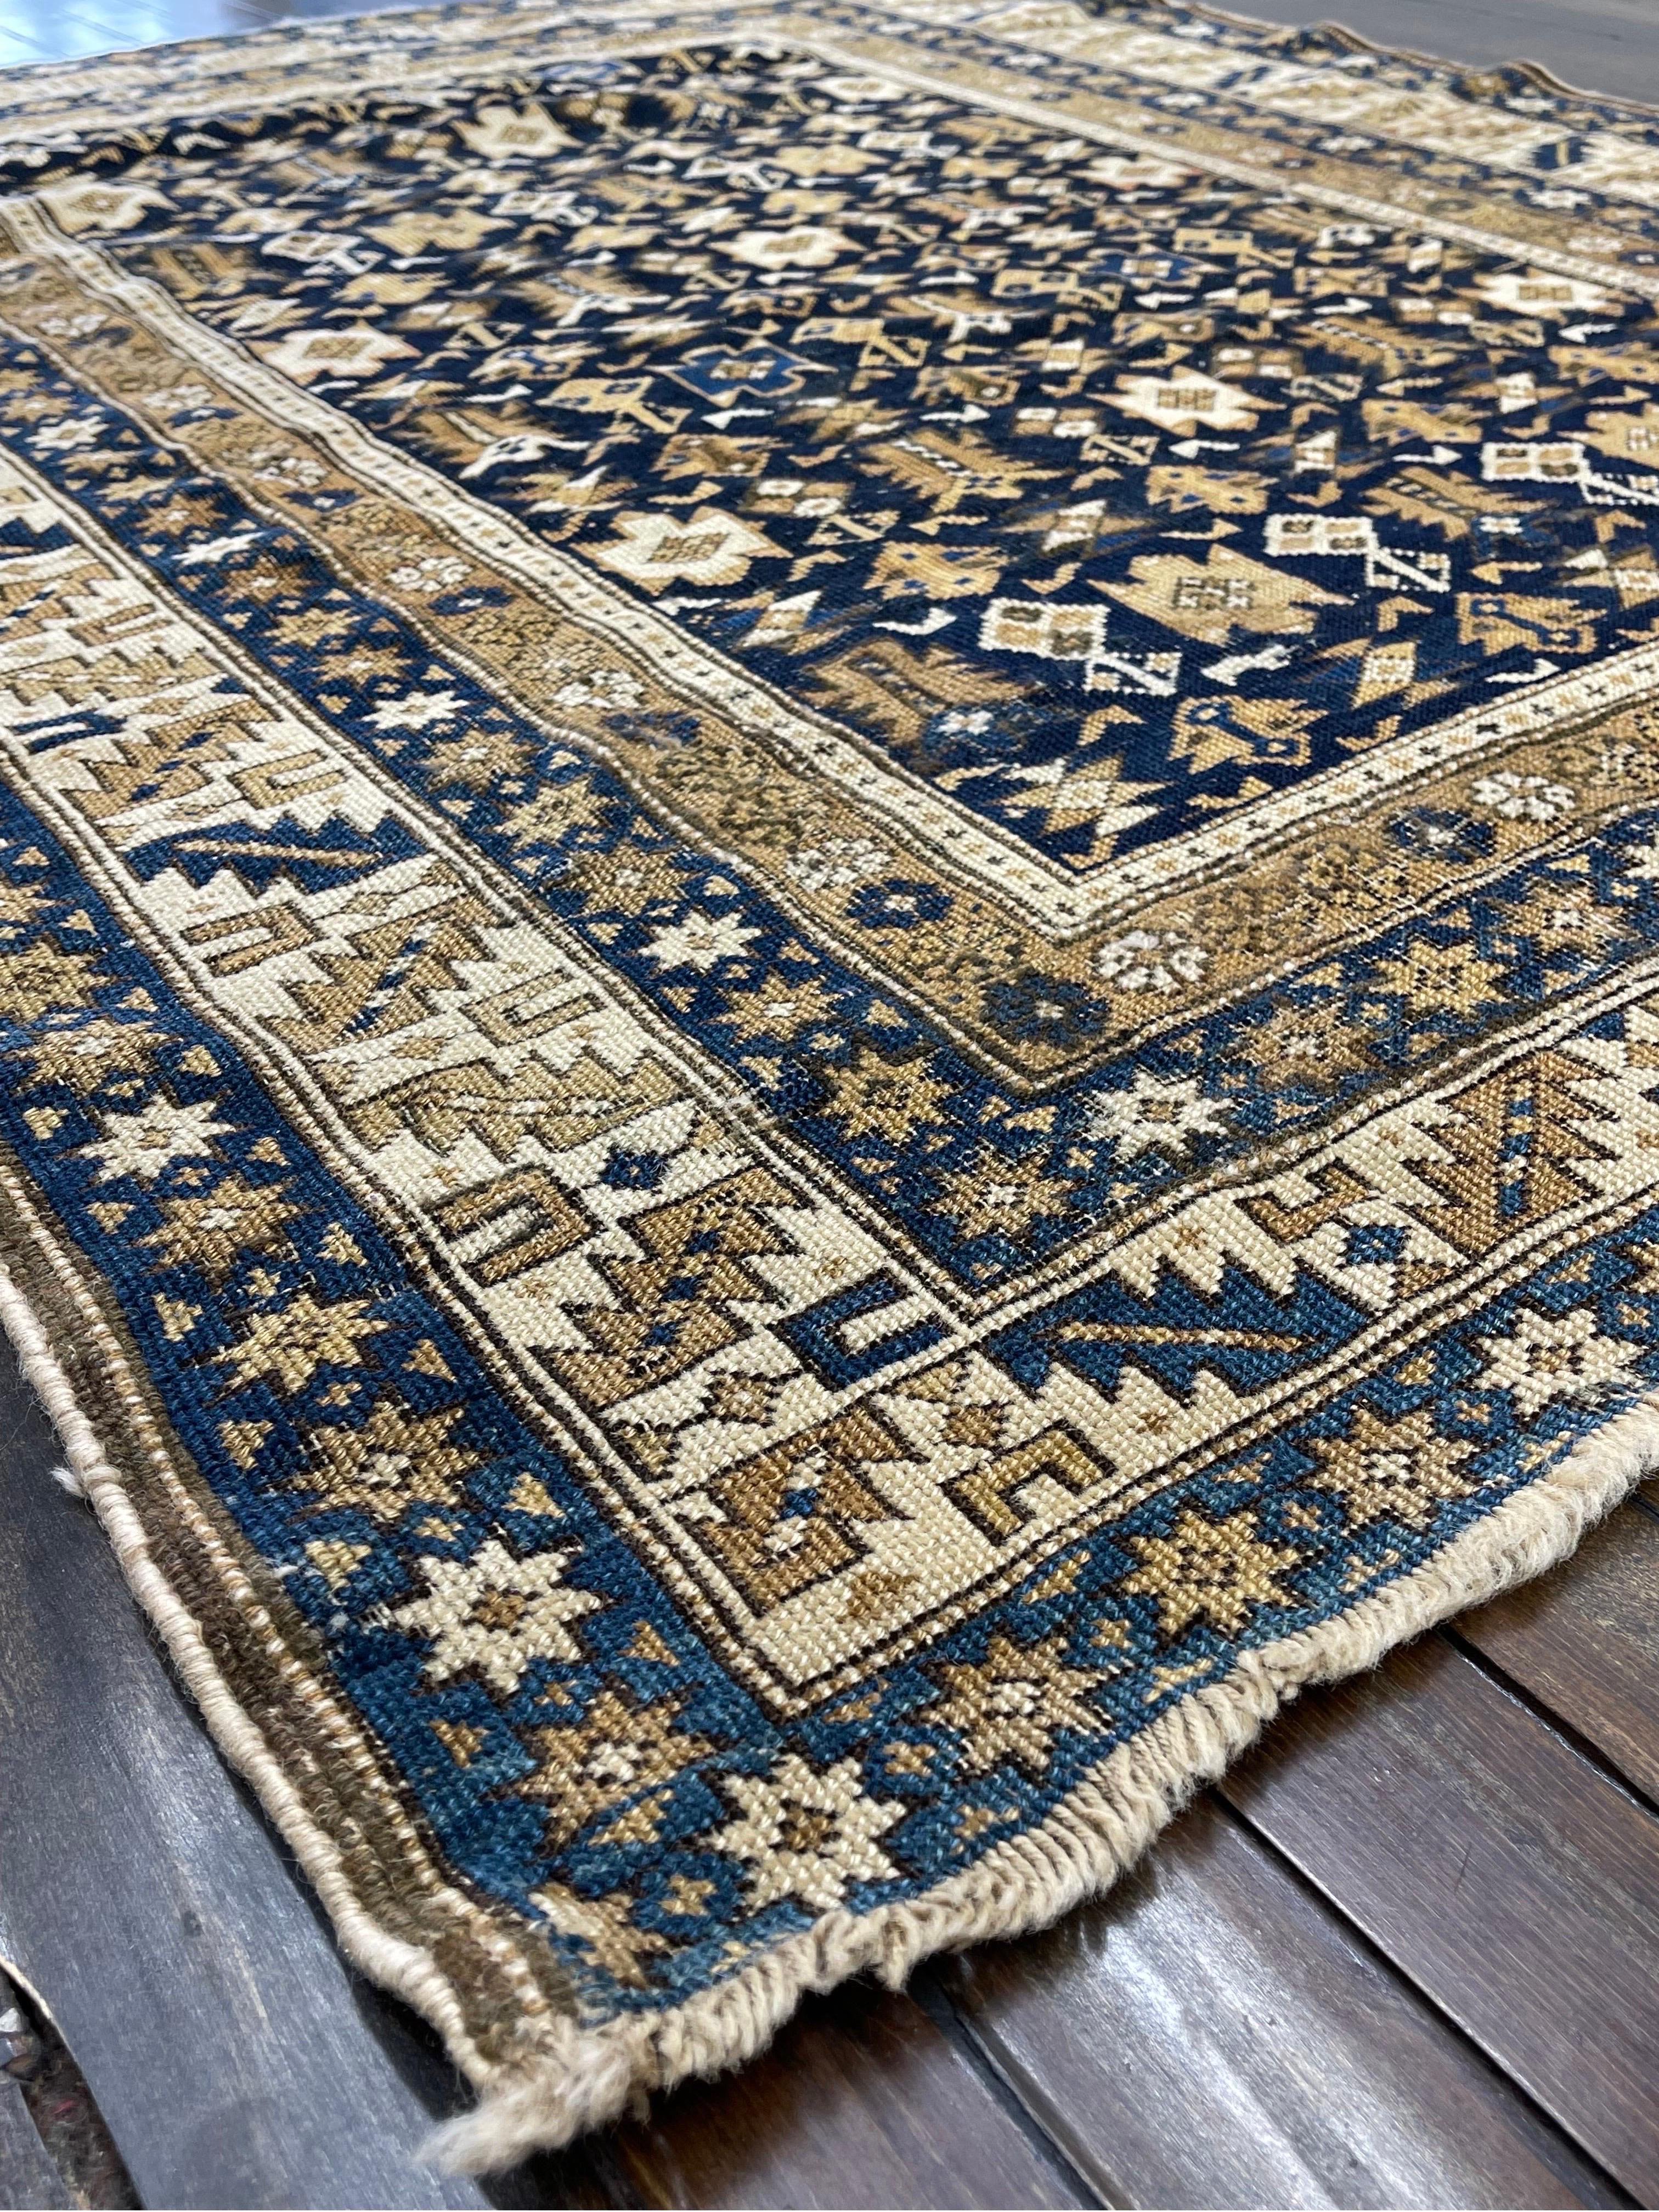 Vegetable Dyed Antique Caucasian Shirvan Rug Circa 1900 For Sale